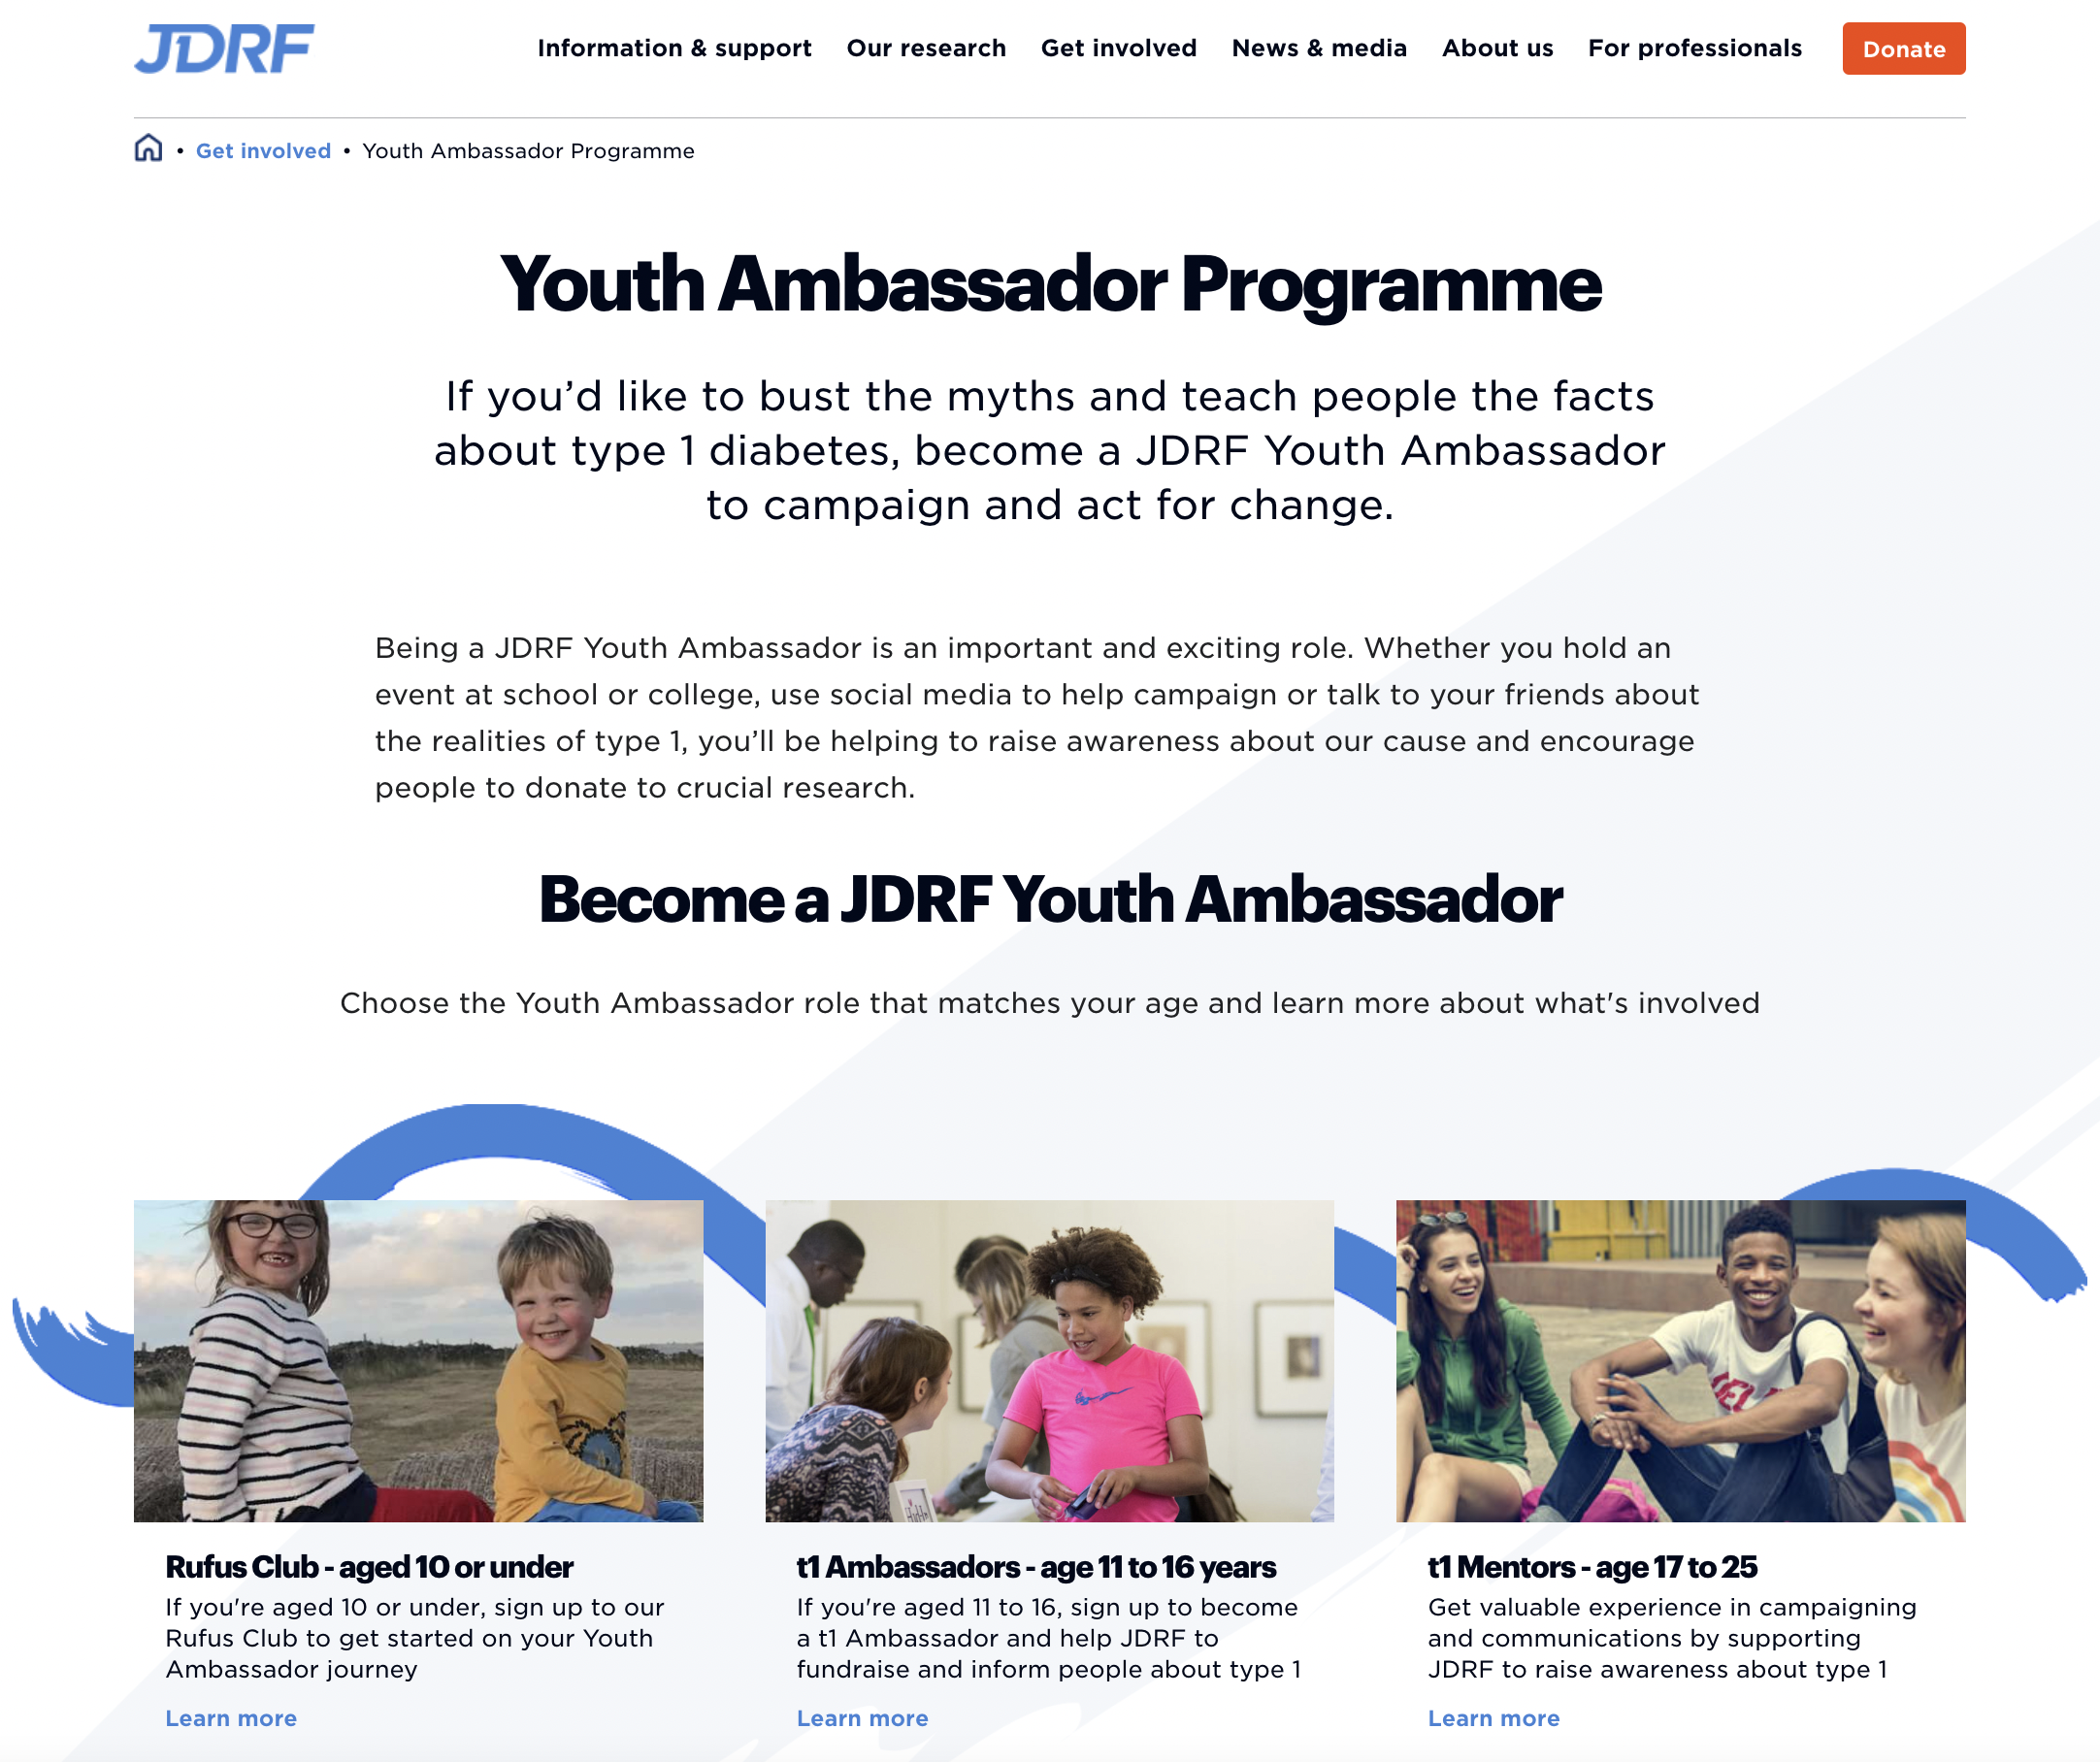 JDRF re-launch their Youth Ambassador Programme